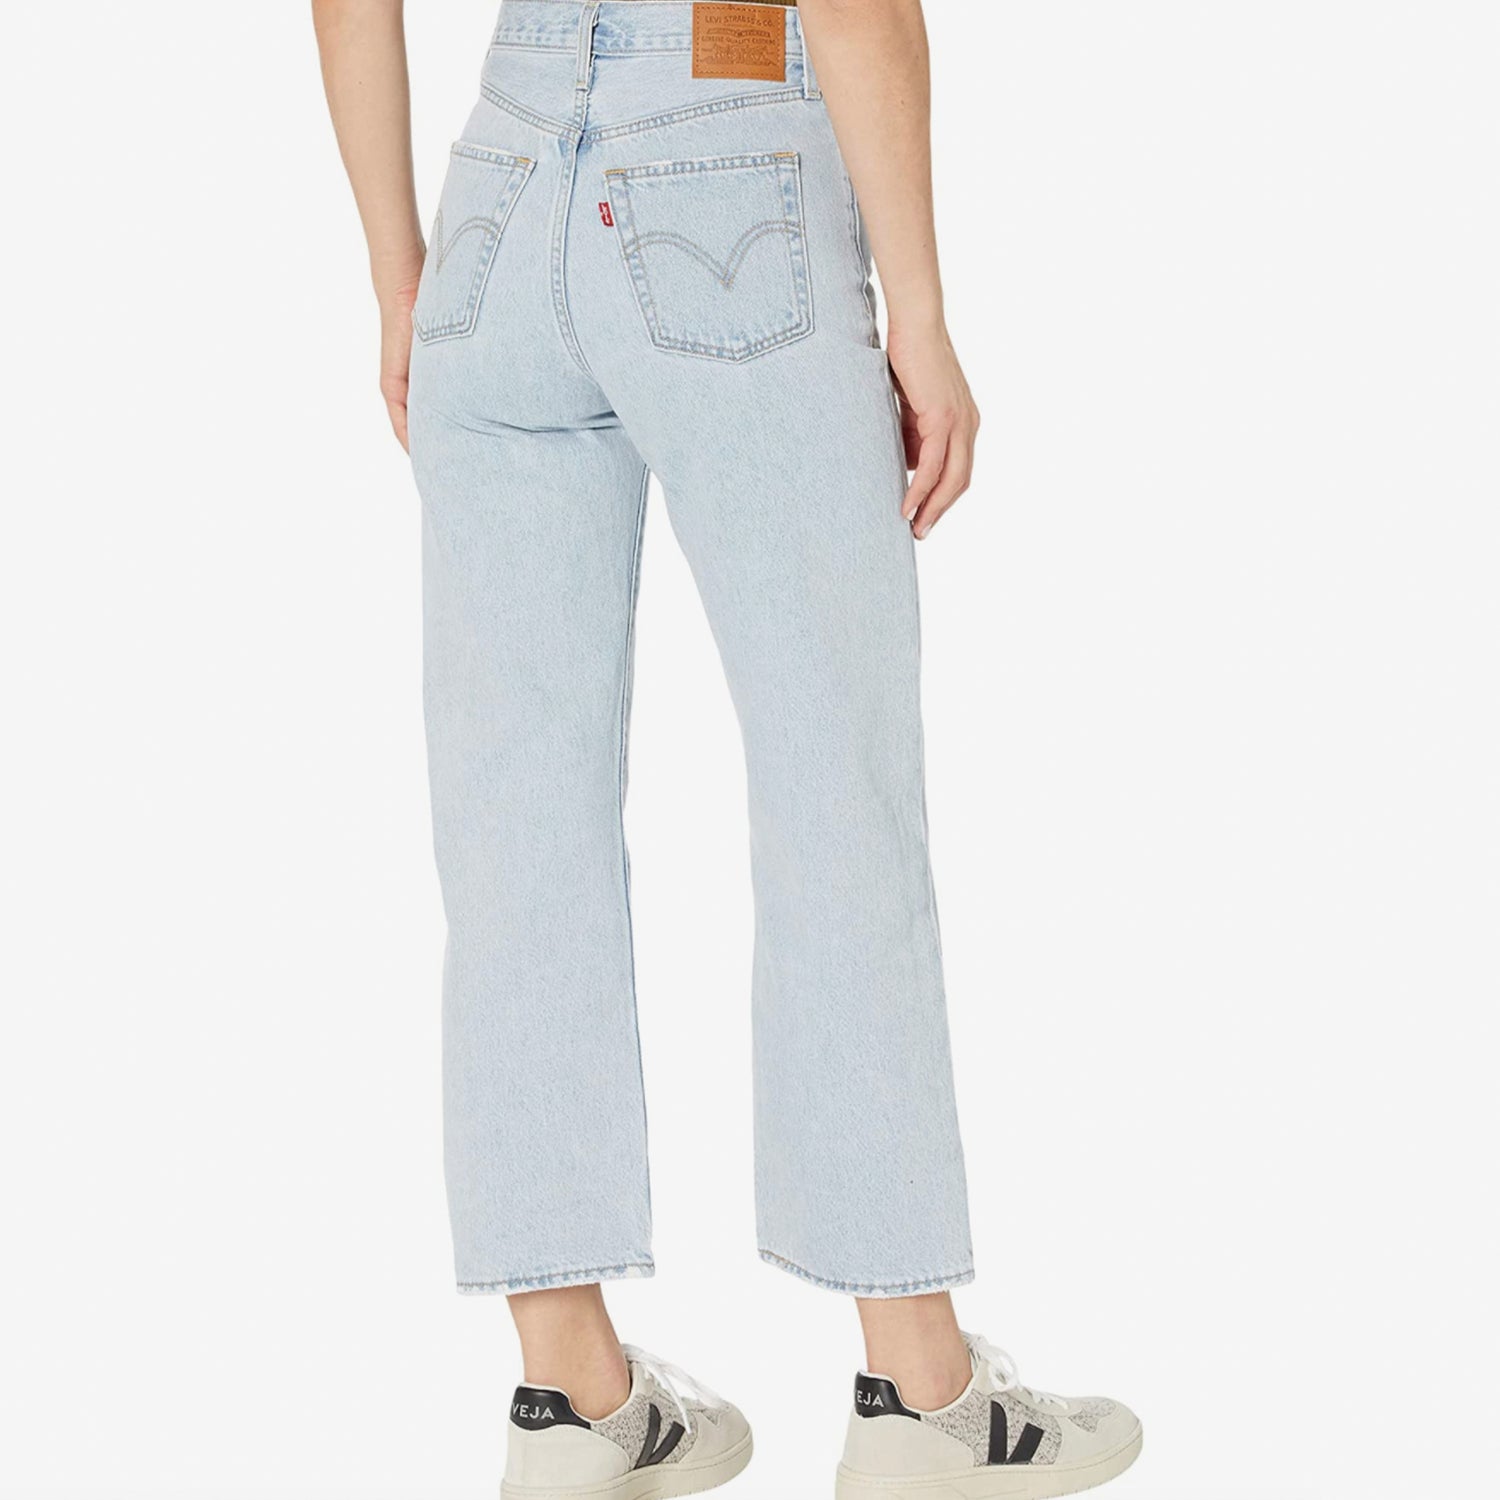 Levi's Ribcage Straight Ankle Jean. Want a pair of jeans you'll always look good in? These Levi's are just the pair! They feature a high rise with a classic straight leg. The iconic leather patch still sits at the back waist with a five-pocket construction and button and zip-fly closure